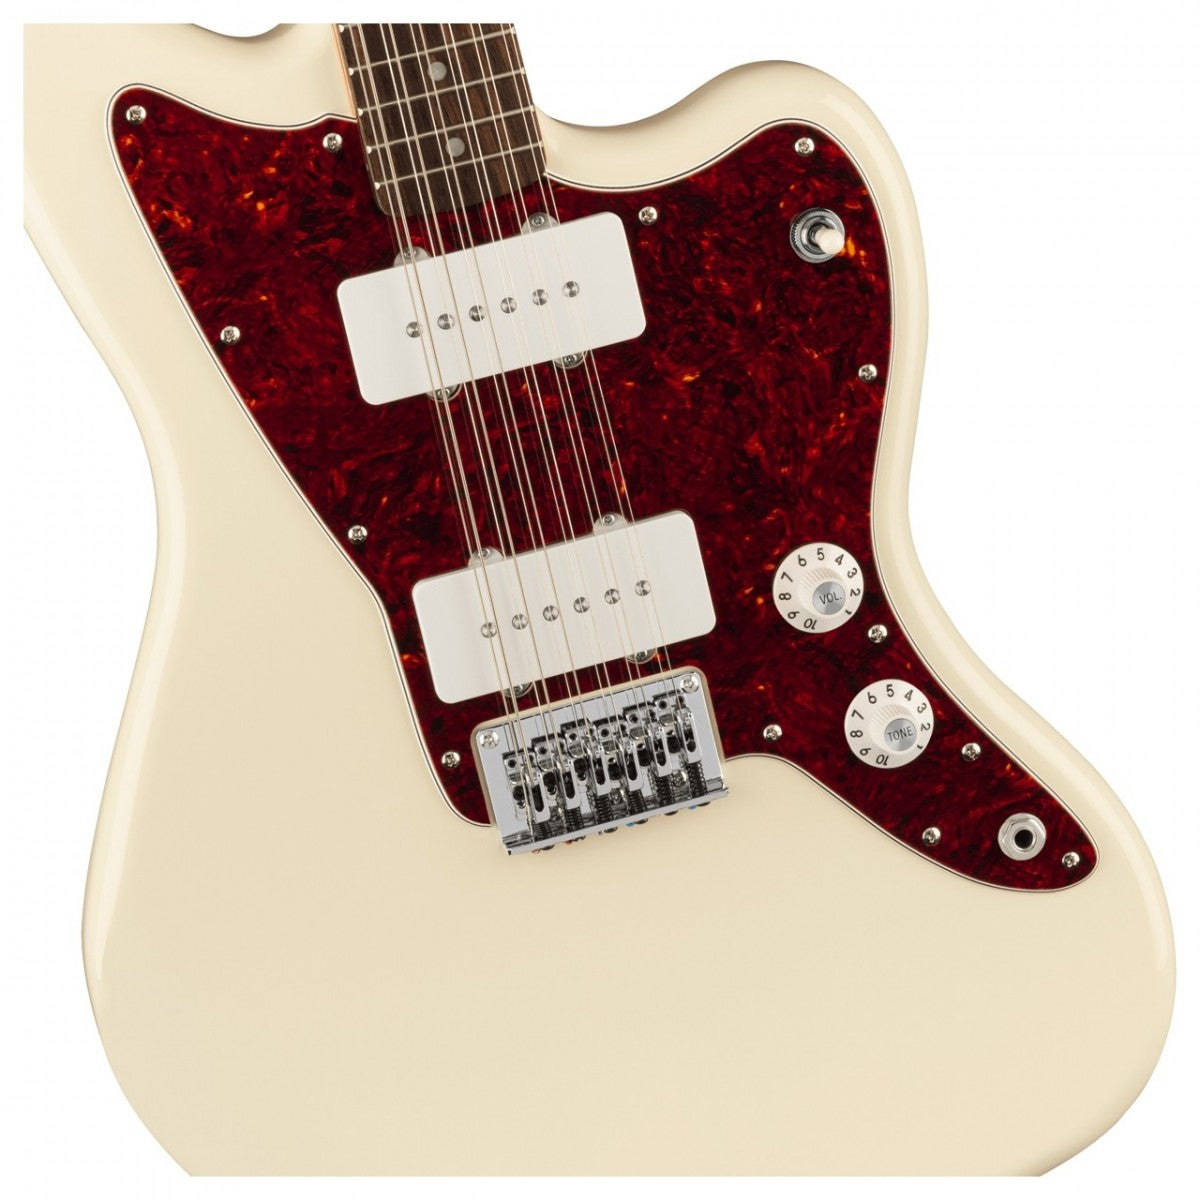 Squier Paranormal Jazzmaster XII 12-String Electric Guitar - Olympic White